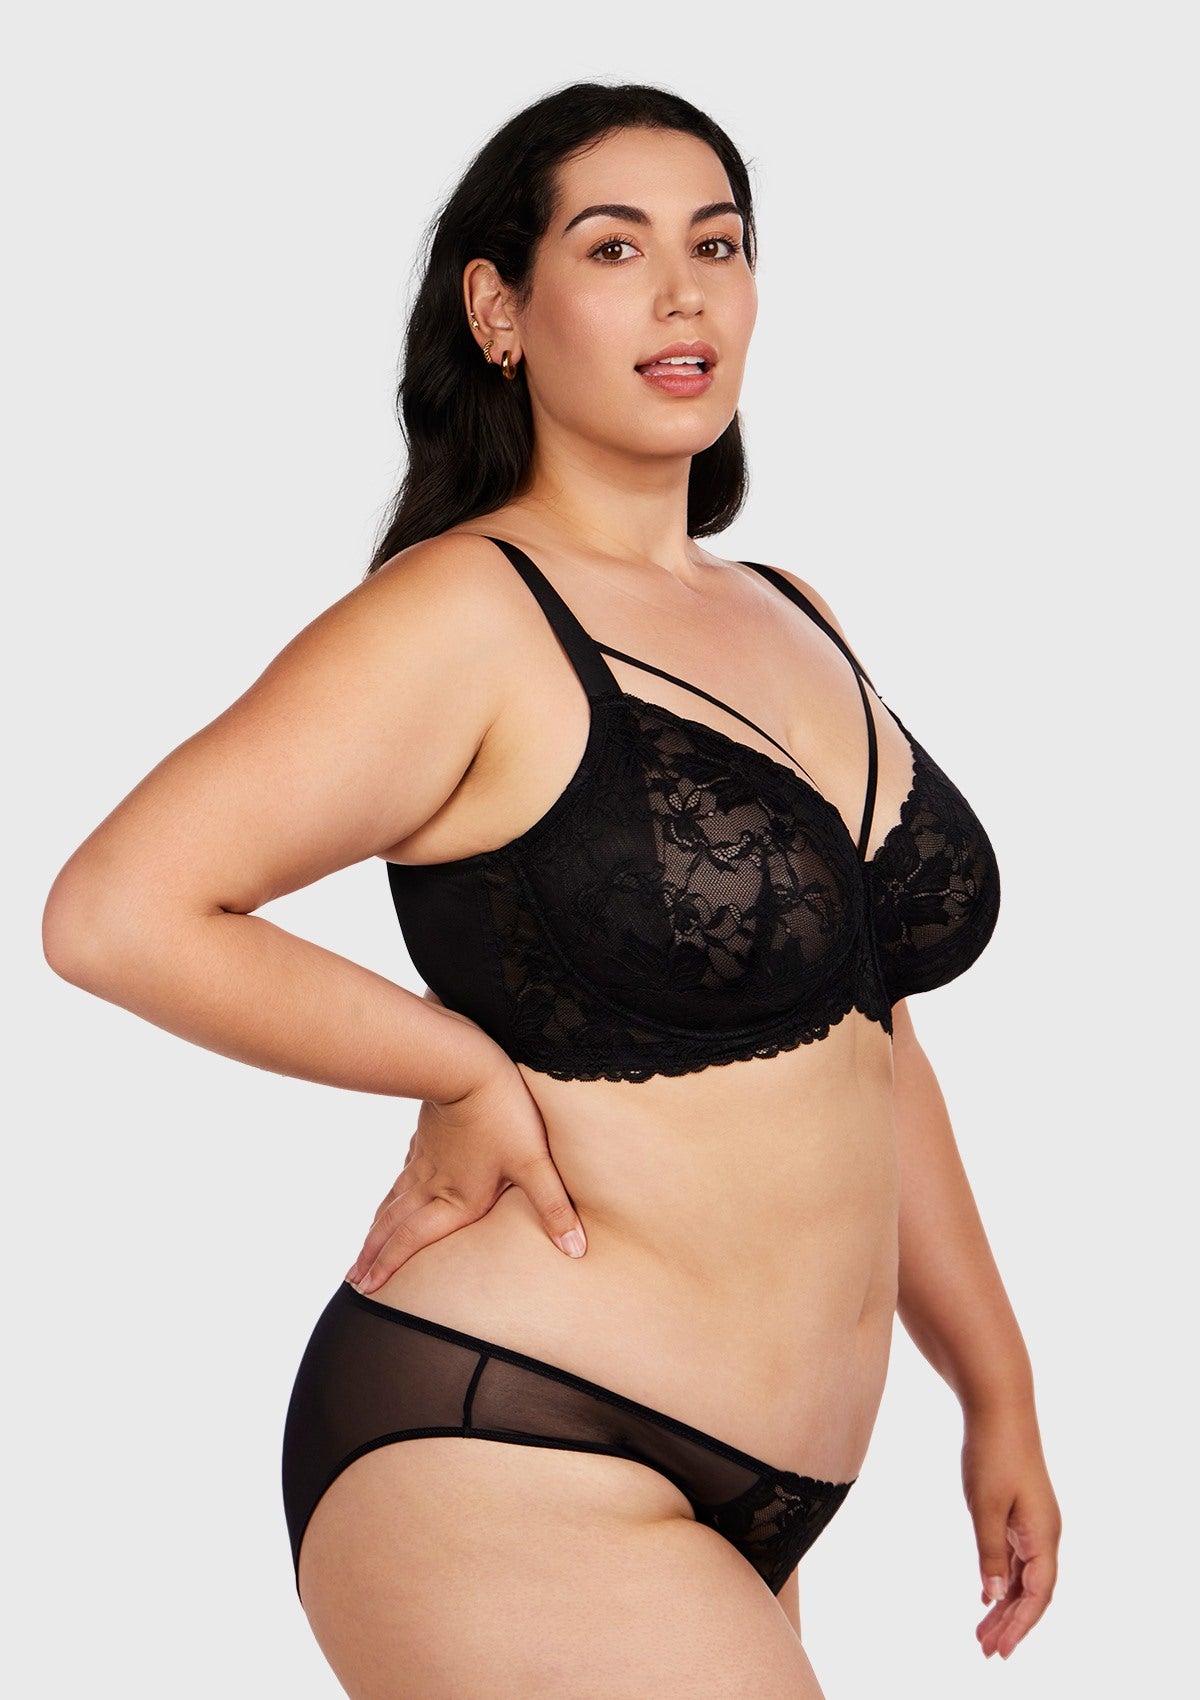 HSIA Pretty In Petals Bra - Plus Size Lingerie For Comfrot And Support - Black / 42 / D